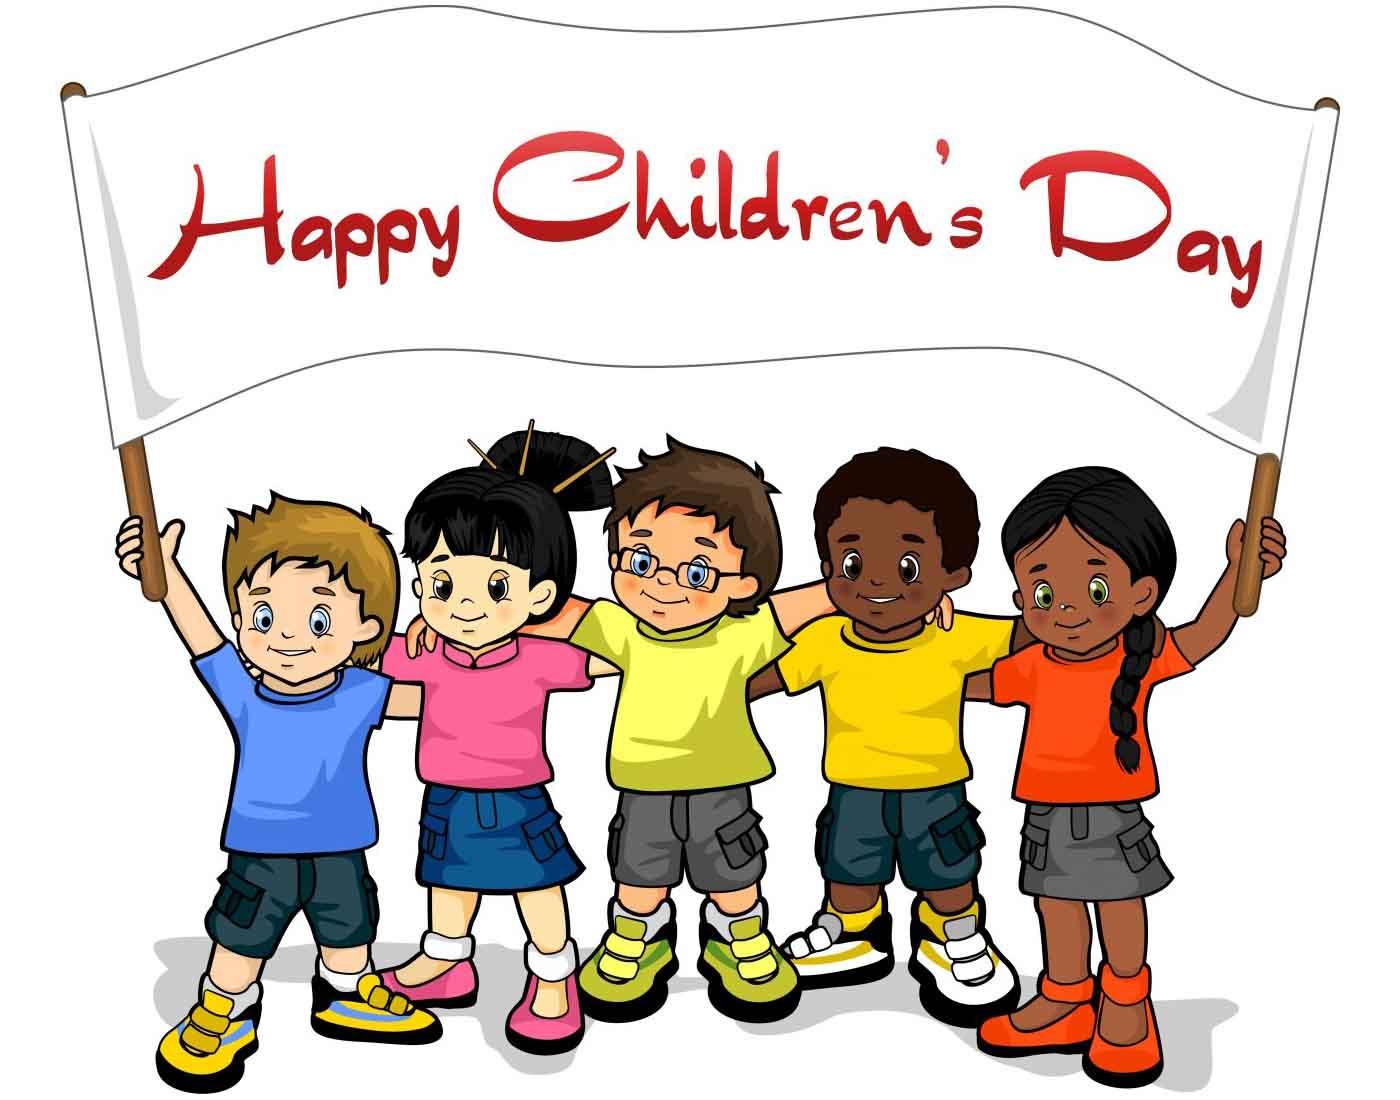 Happy Children's Day 2018 Image Speech Quotes Wishes Poems